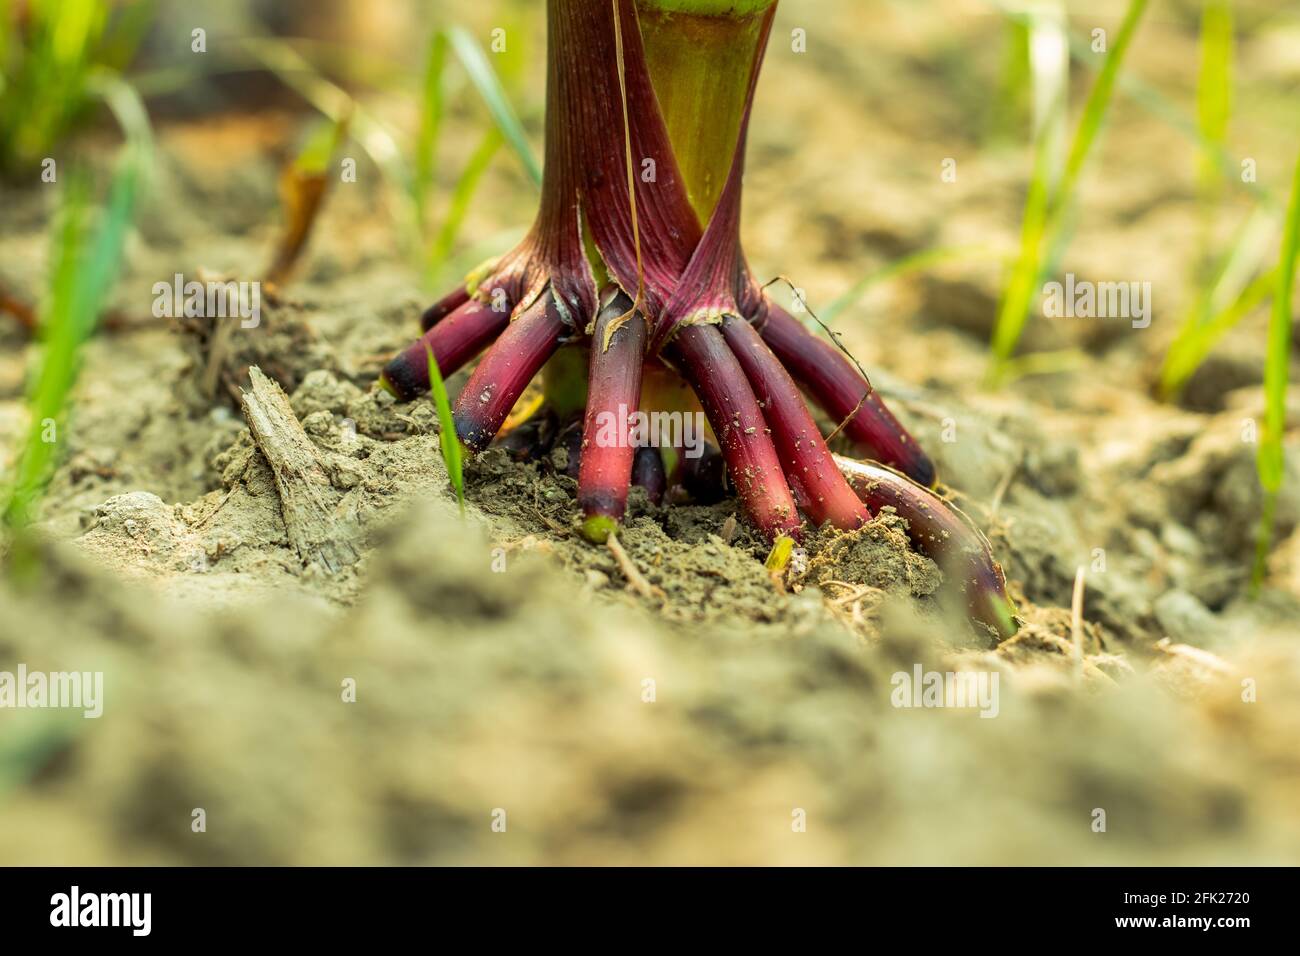 The Maize or corn tree root on soils and it is brown red and green color roots Stock Photo